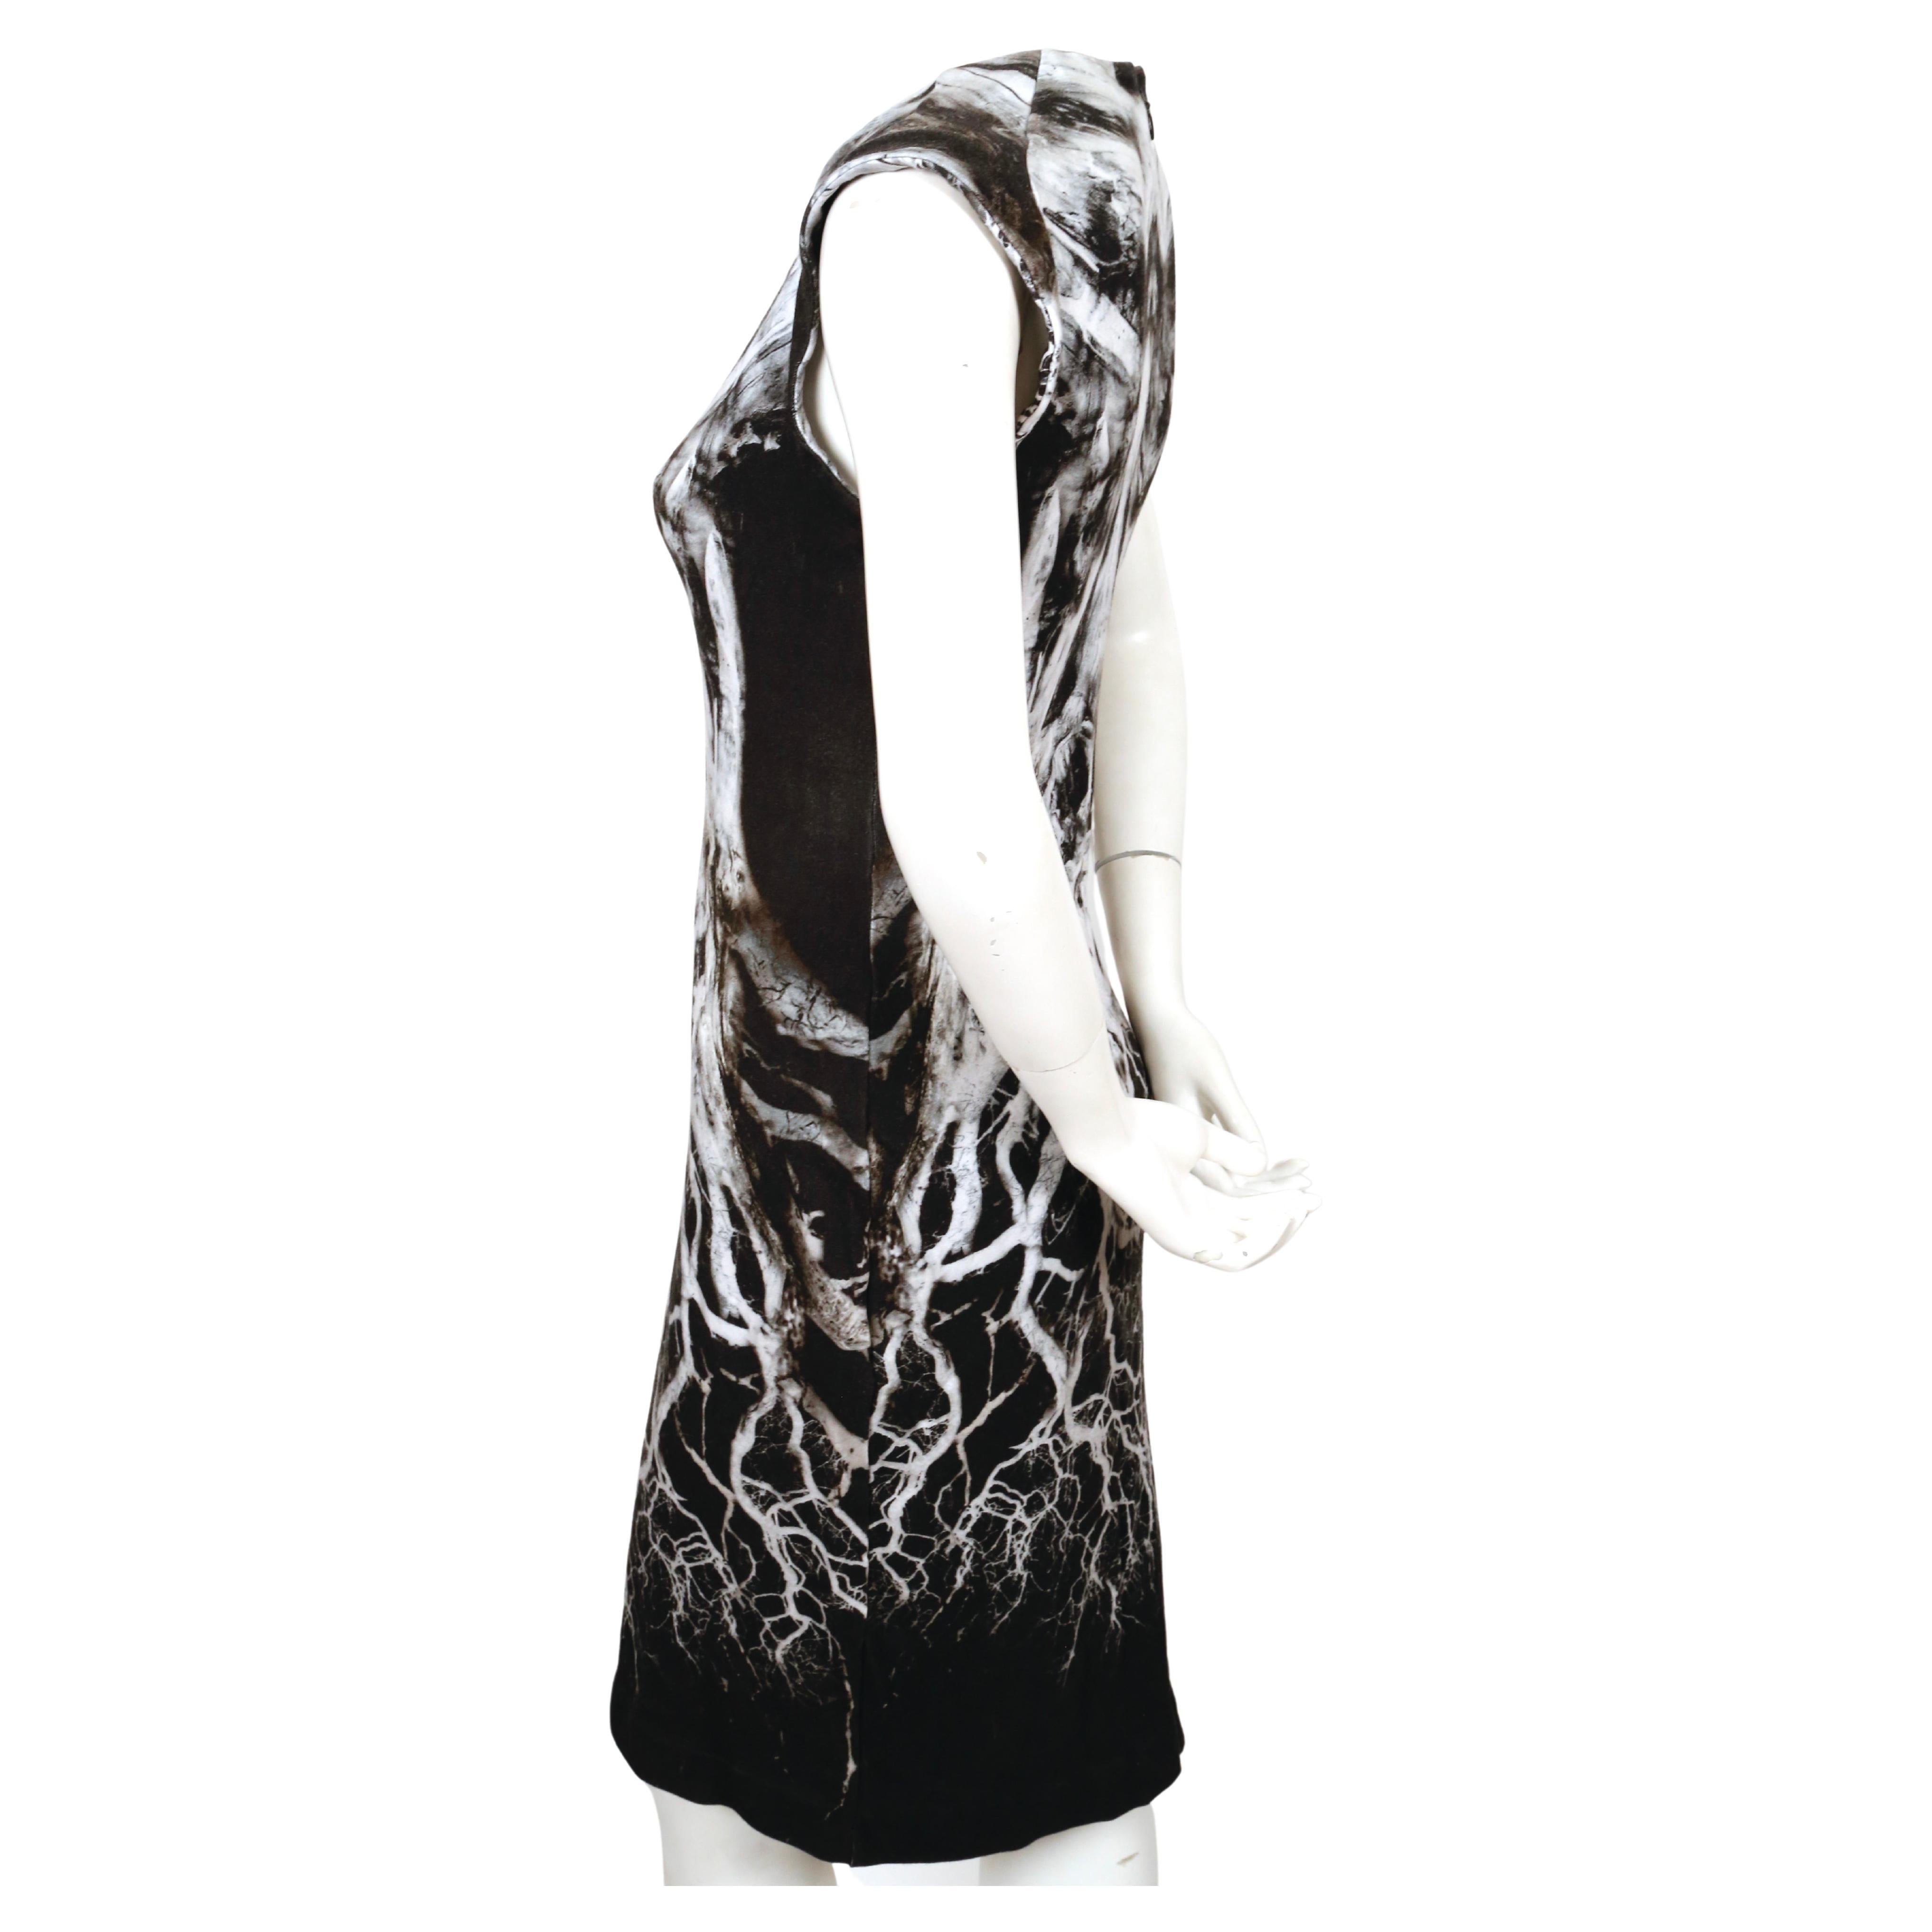 Very rare screen-printed 'skeleton' dress created by Alexander McQueen dating to 2010. Italian size 42 best fits a size 6 to 8. Approximate measurements:  bust 34